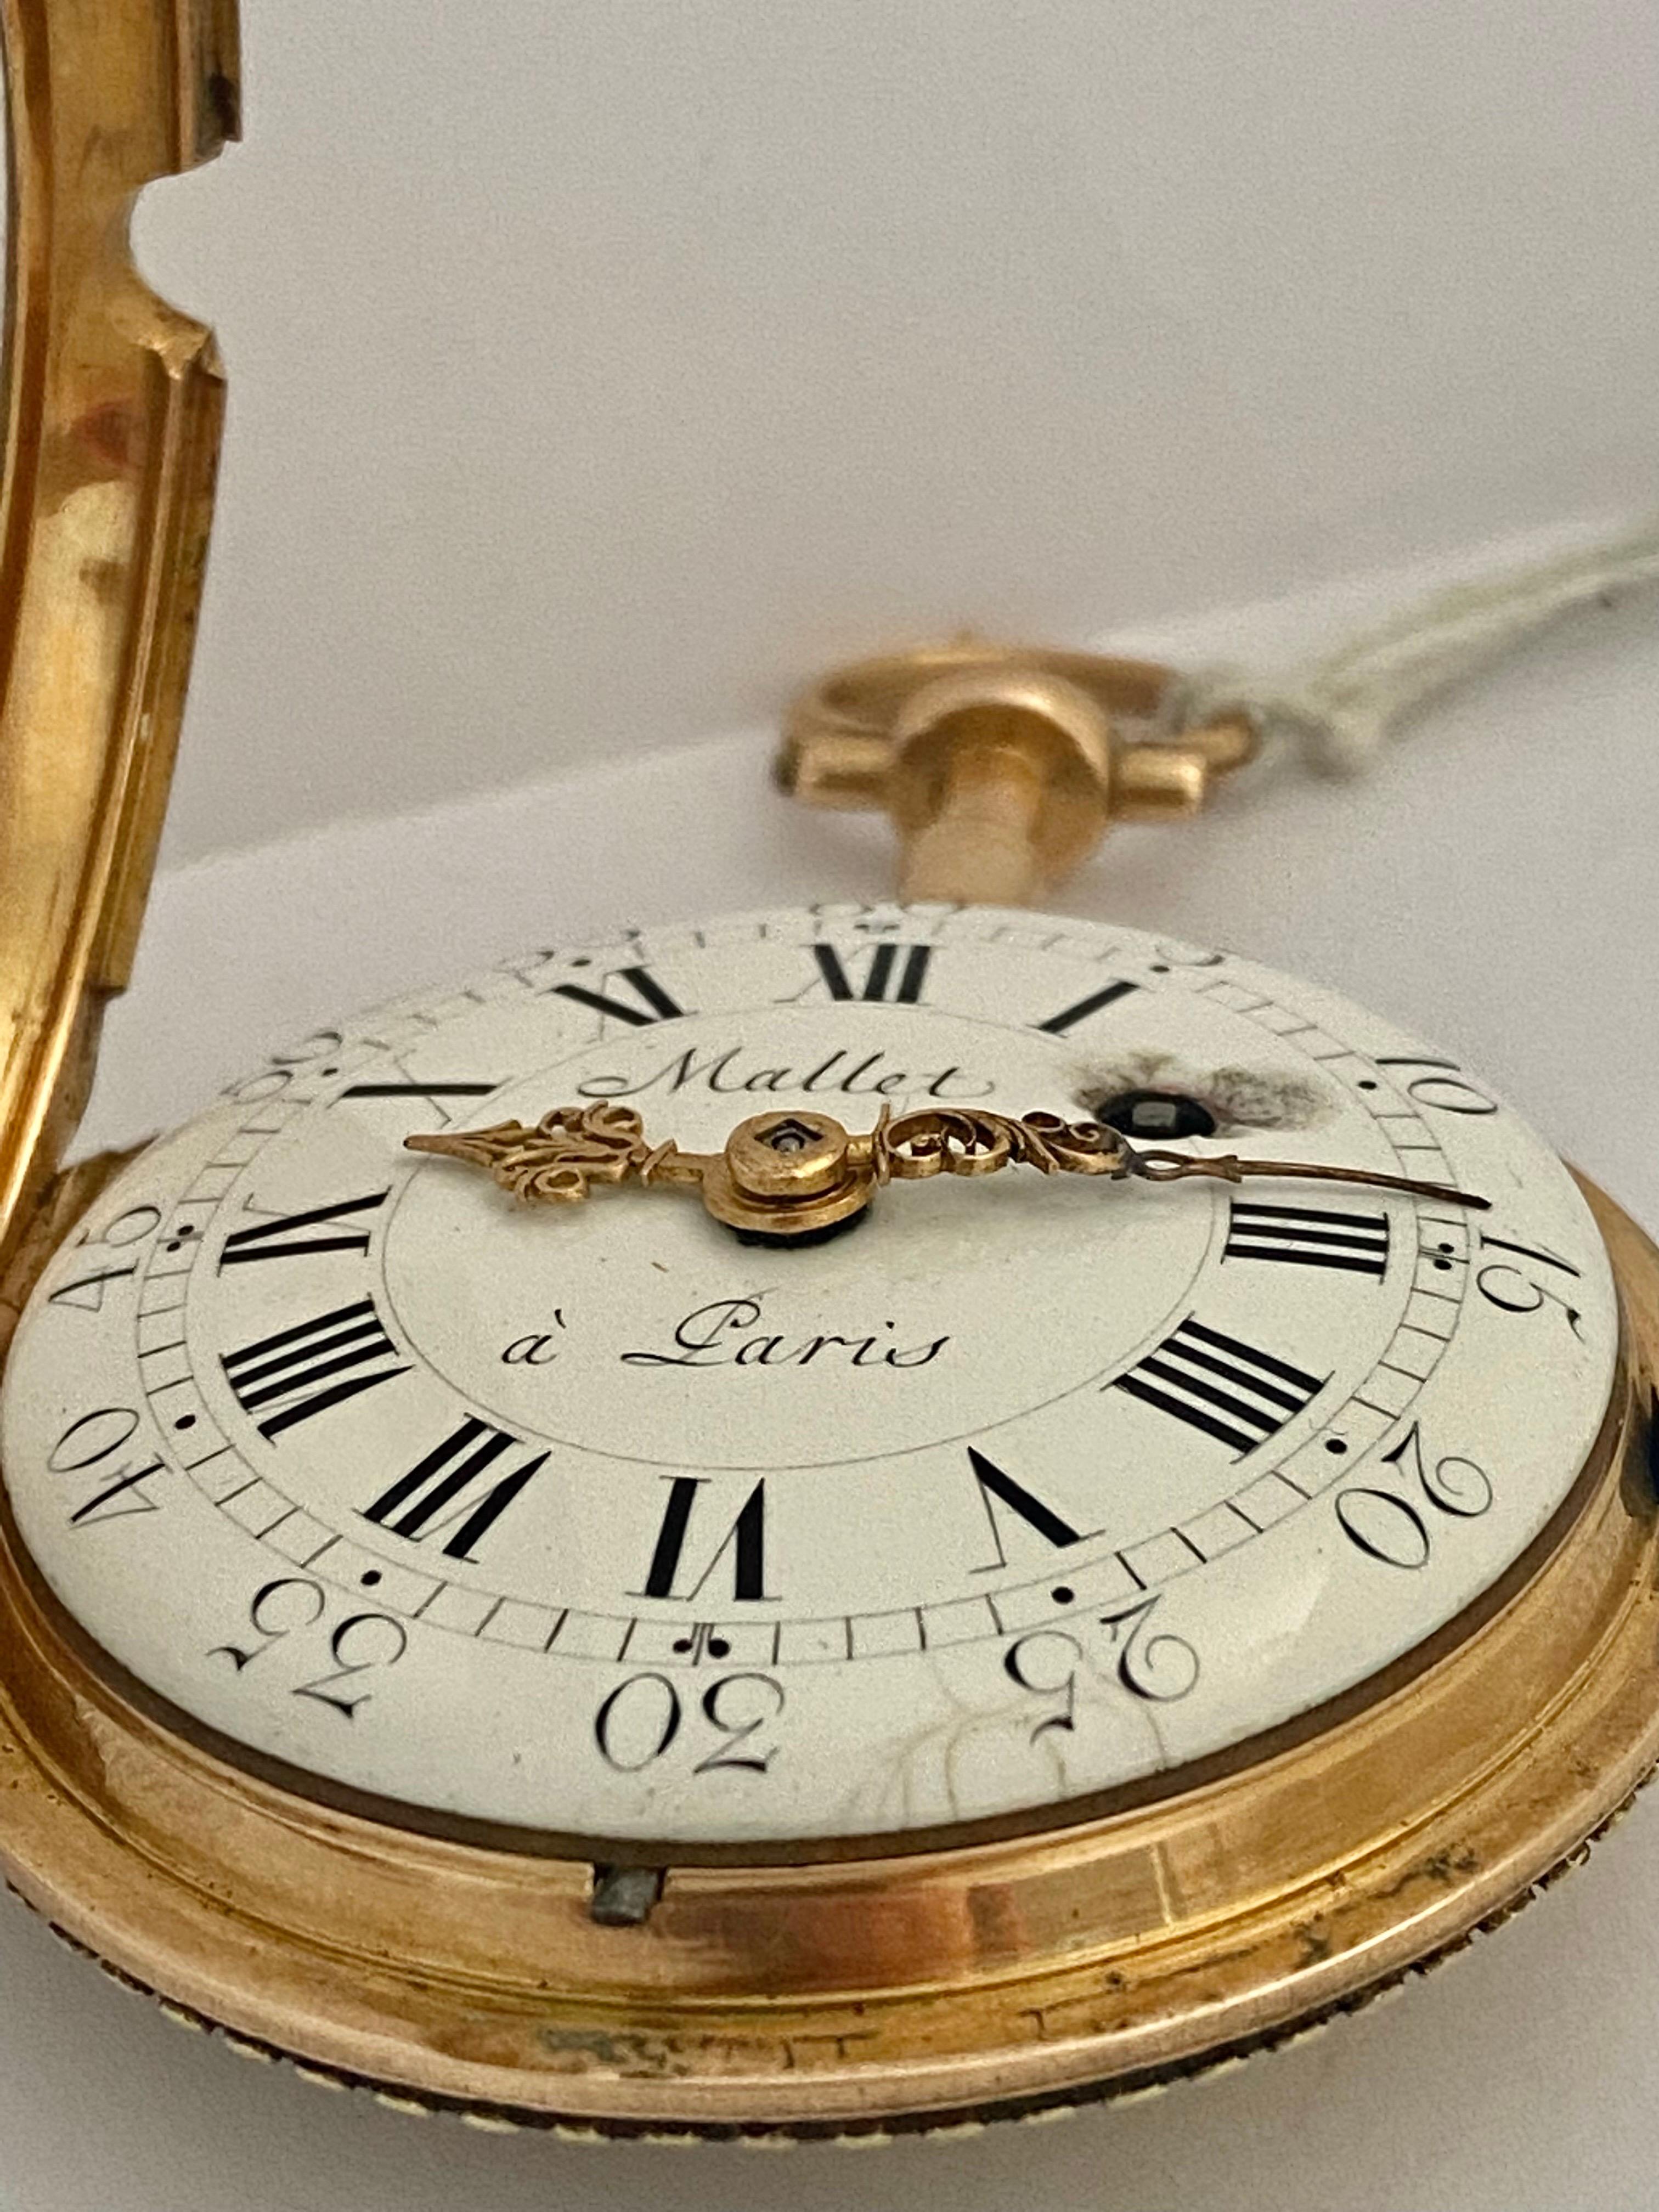 Rare & Early Verge Fusee 18 Karat Tri-Color Gold Pocket Watch by Mallet a Paris For Sale 7